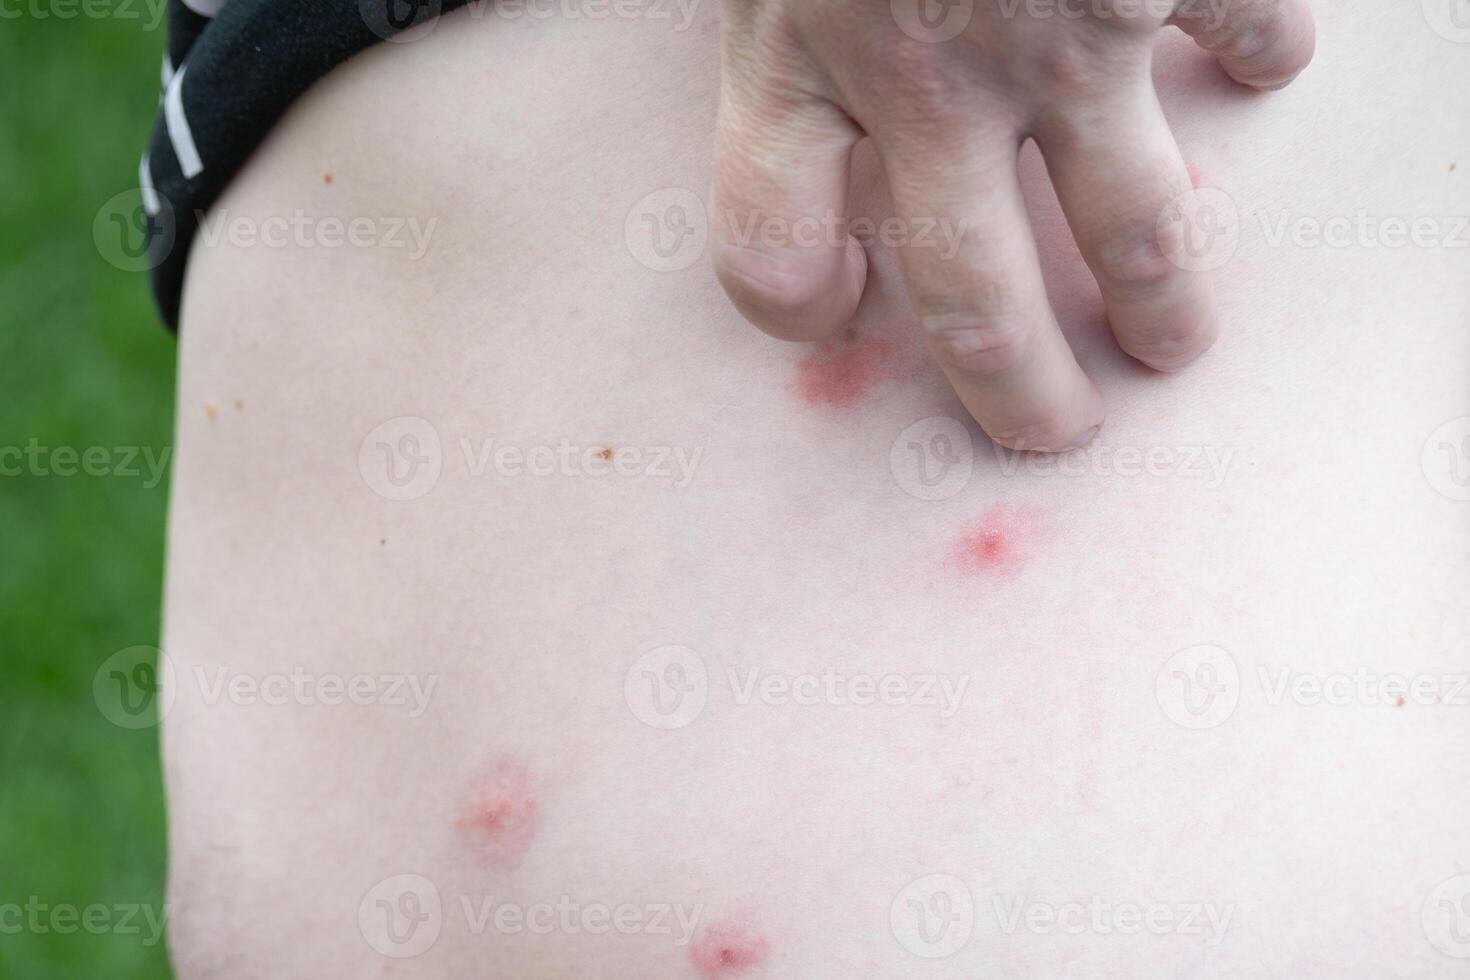 Bites on the skin of a man. photo